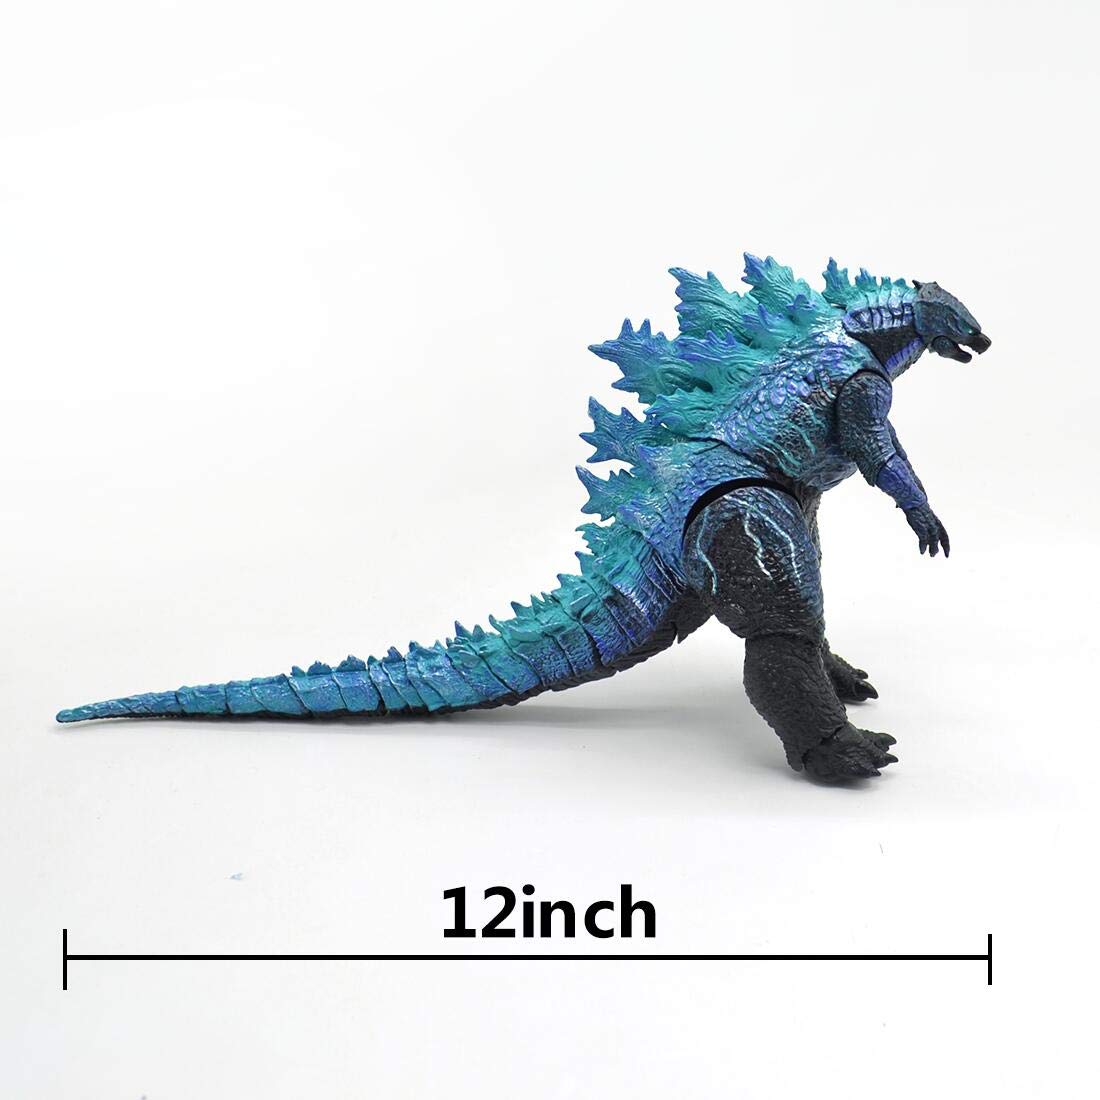 2019 Dinosaur Toy King of The Monsters Action Figure Head-to-Tail 12 Inch Statue Model Toy Best Gift